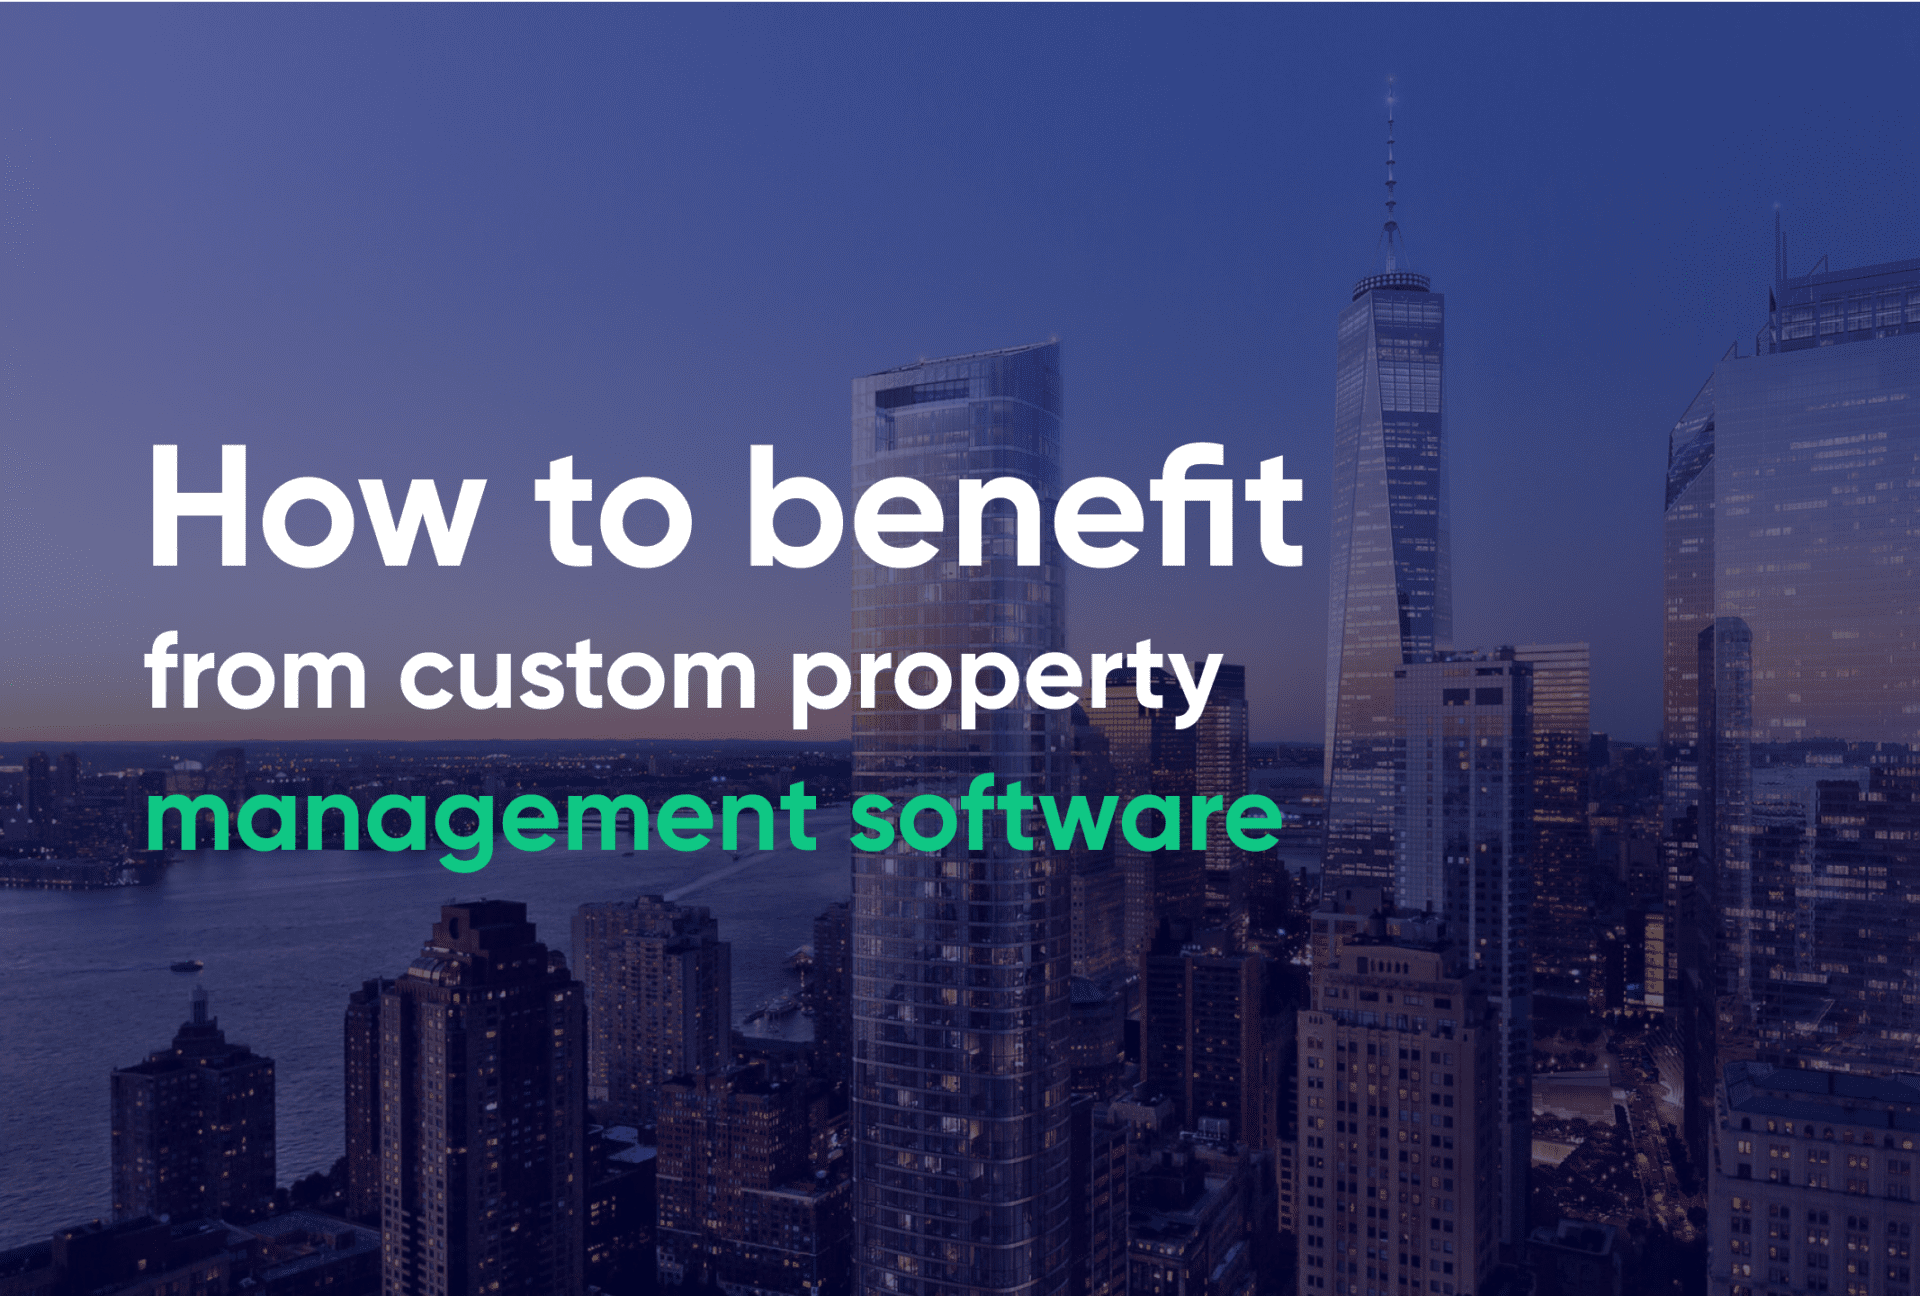 How to benefit from custom property management software